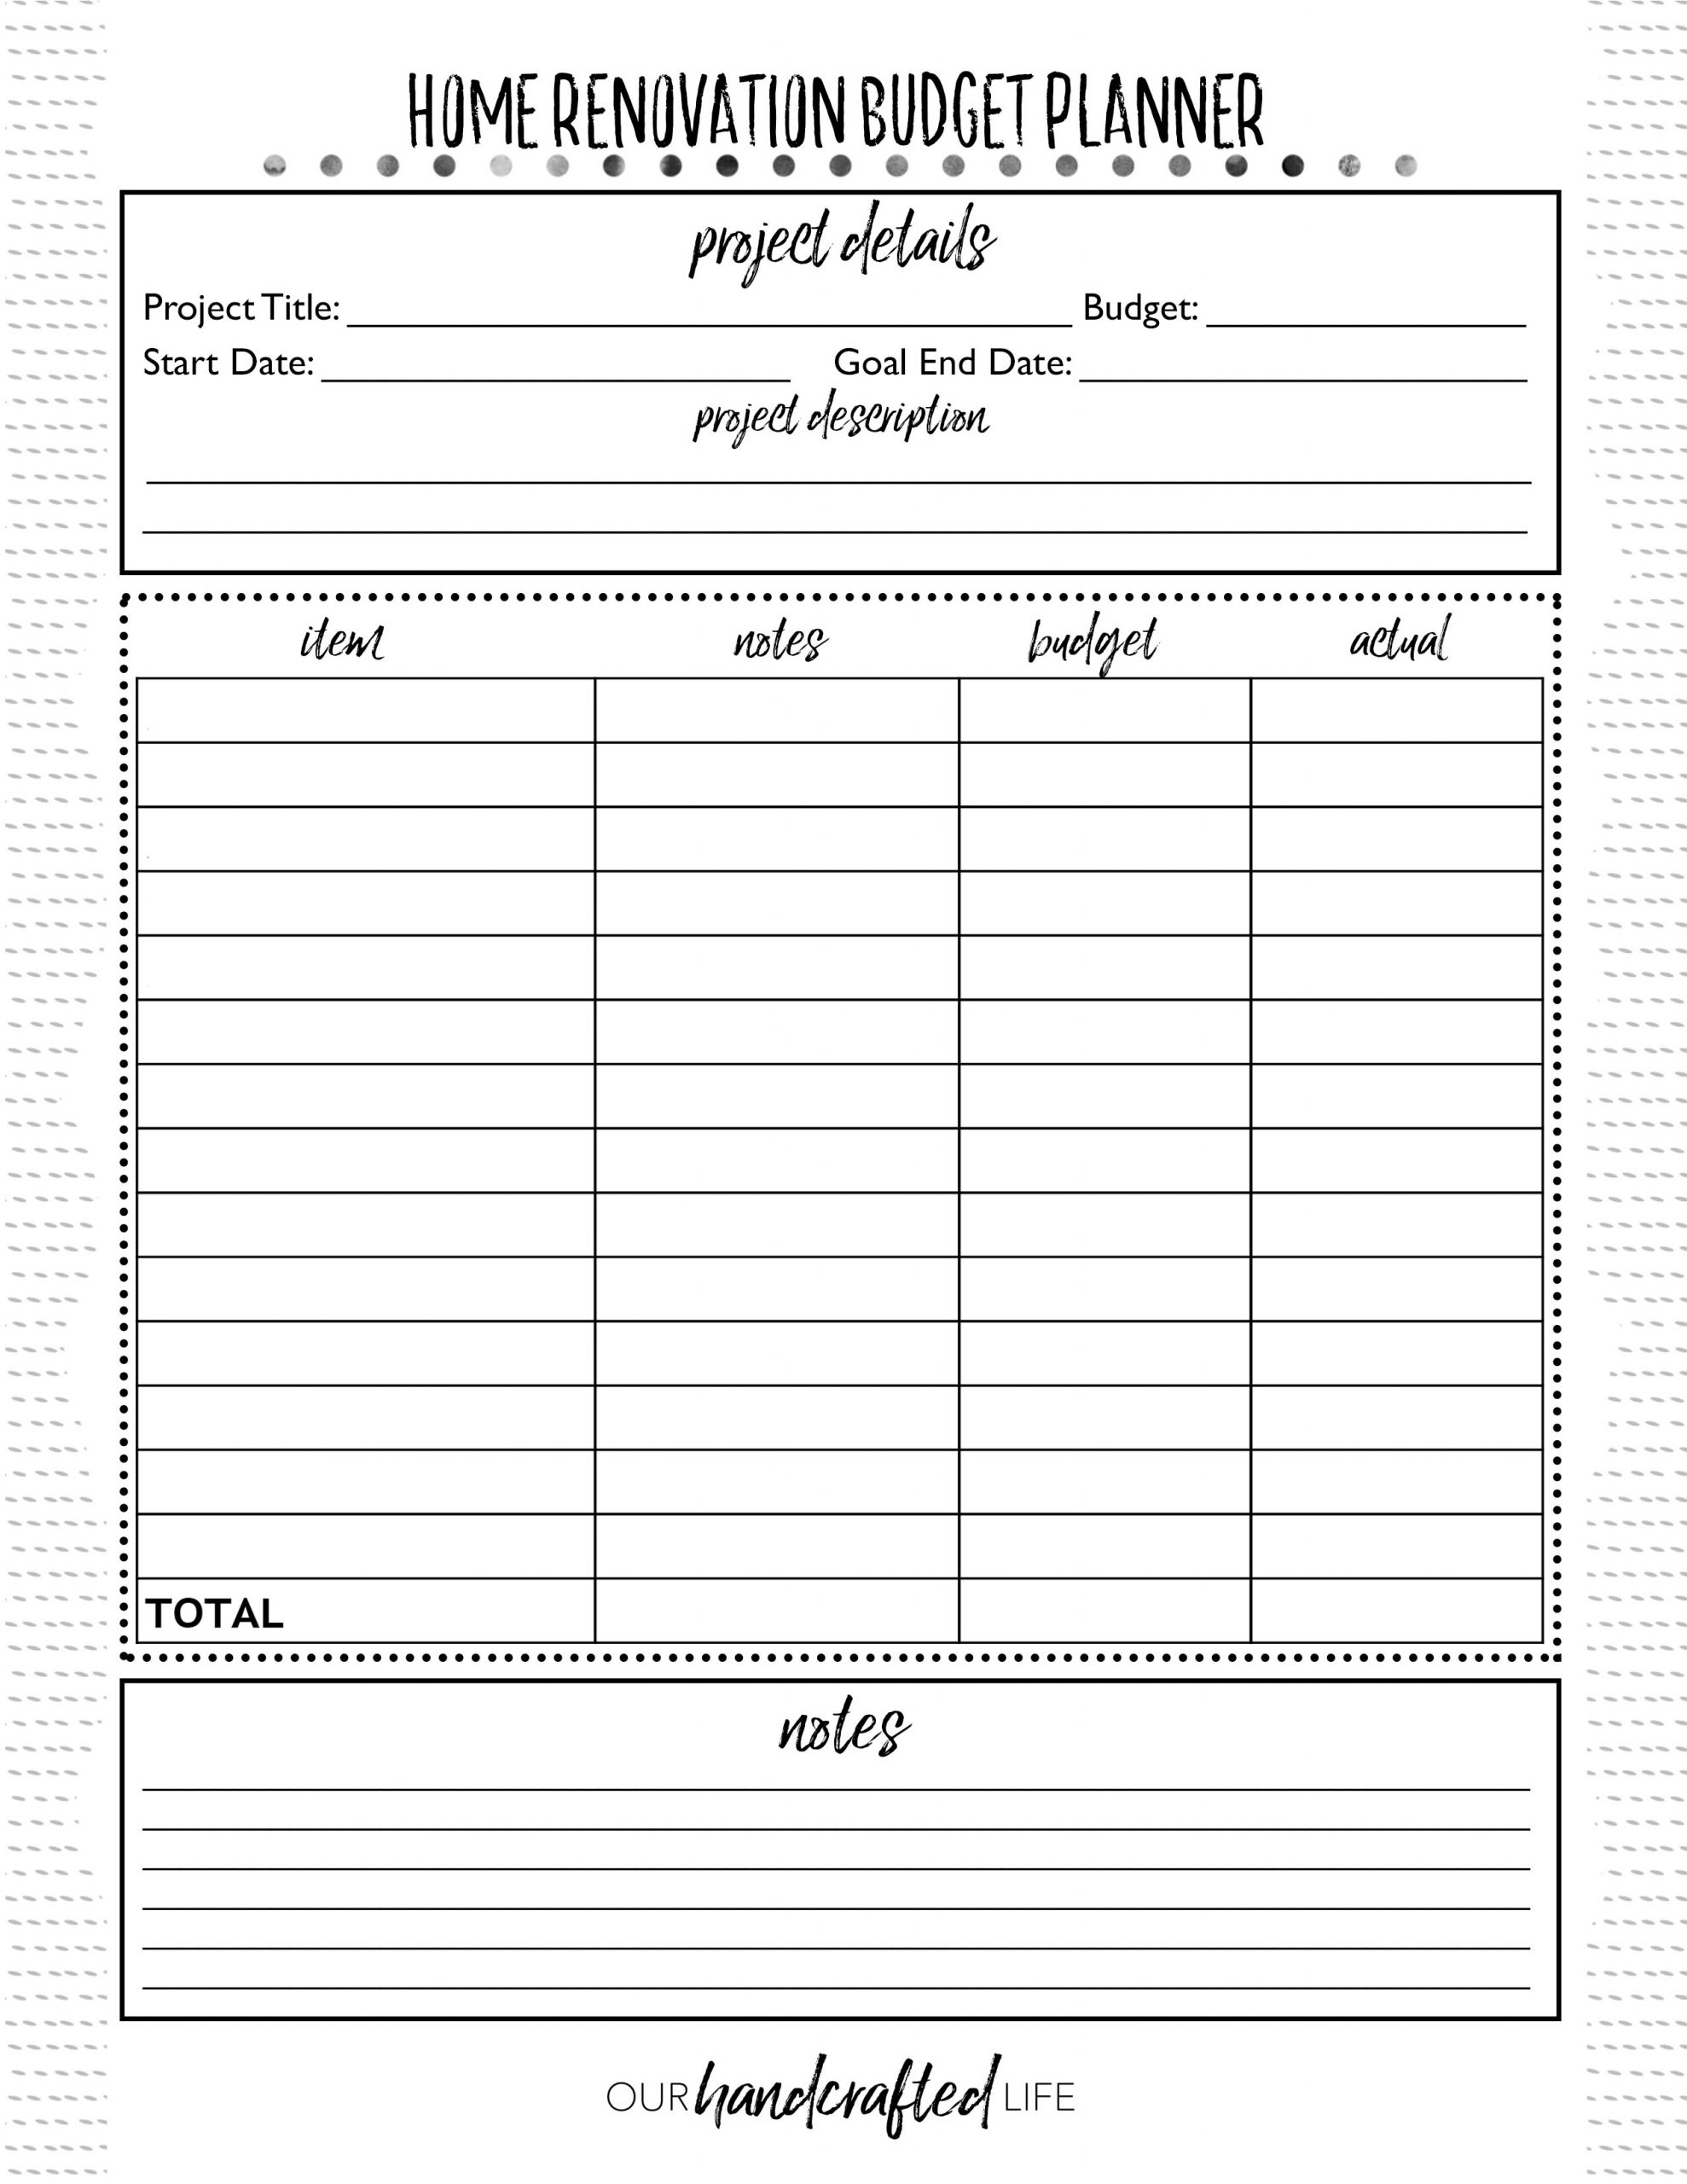 Home Renovation Planner Free Printable DIY Home Reno Project Planner